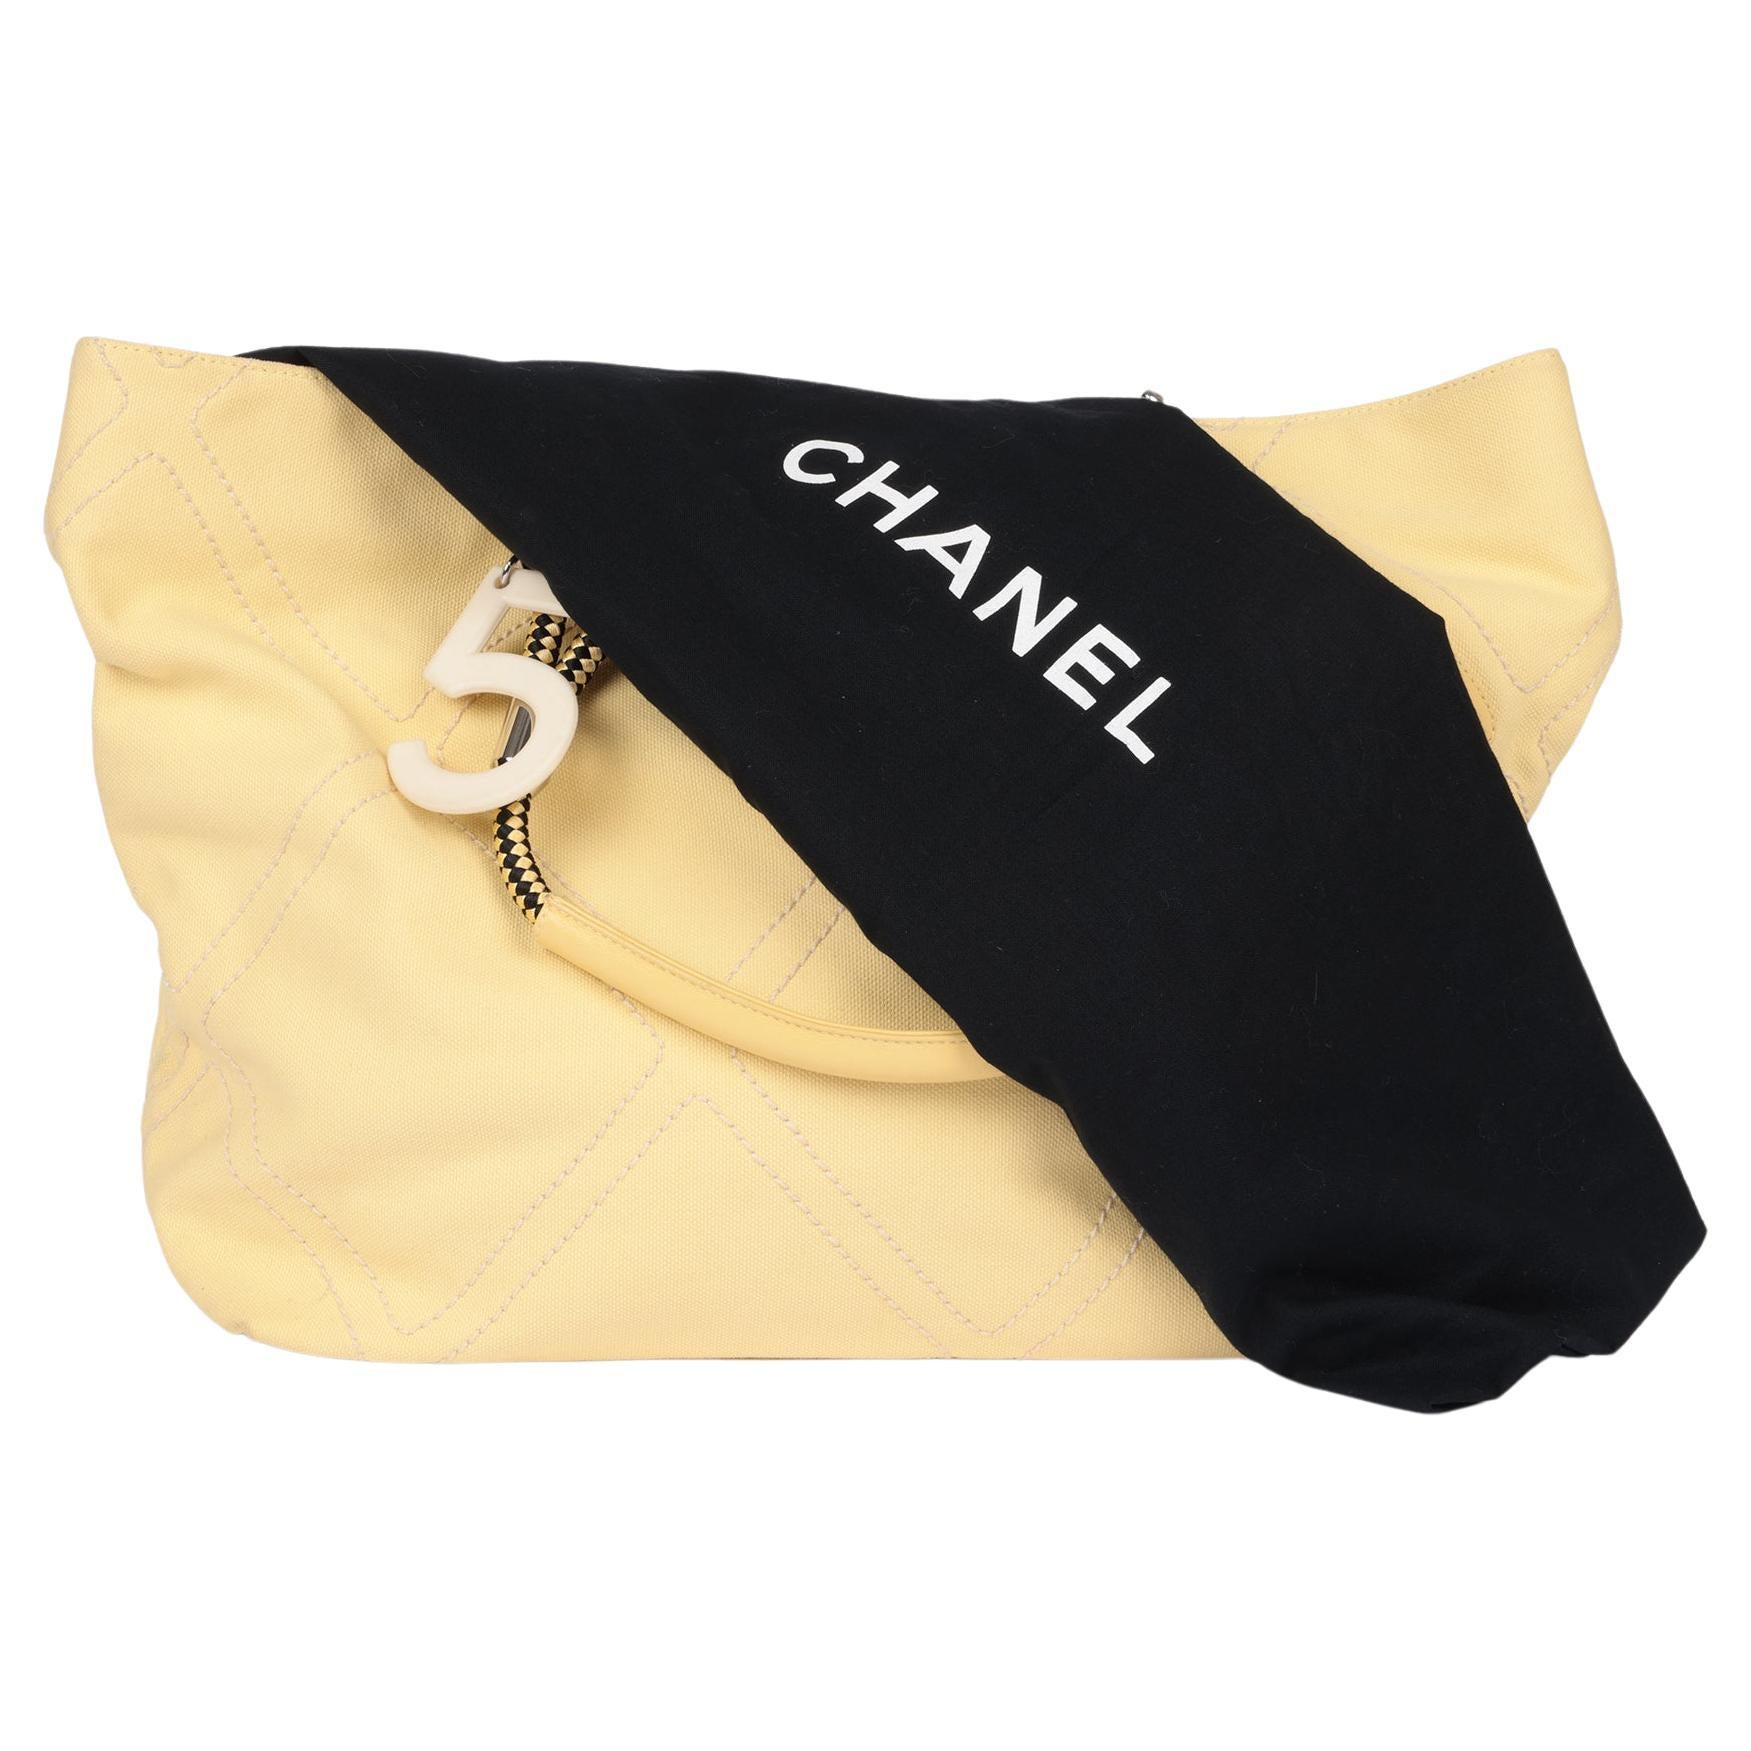 Chanel Yellow Canvas Vintage No.5 Timeless Tote

Brand- Chanel
Model- No.5 Timeless Tote
Product Type- Shoulder, Tote
Serial Number- 96*****
Age- Circa 2004
Accompanied By- Chanel Dust Bag
Colour- Yellow
Hardware- Silver
Material(s)-